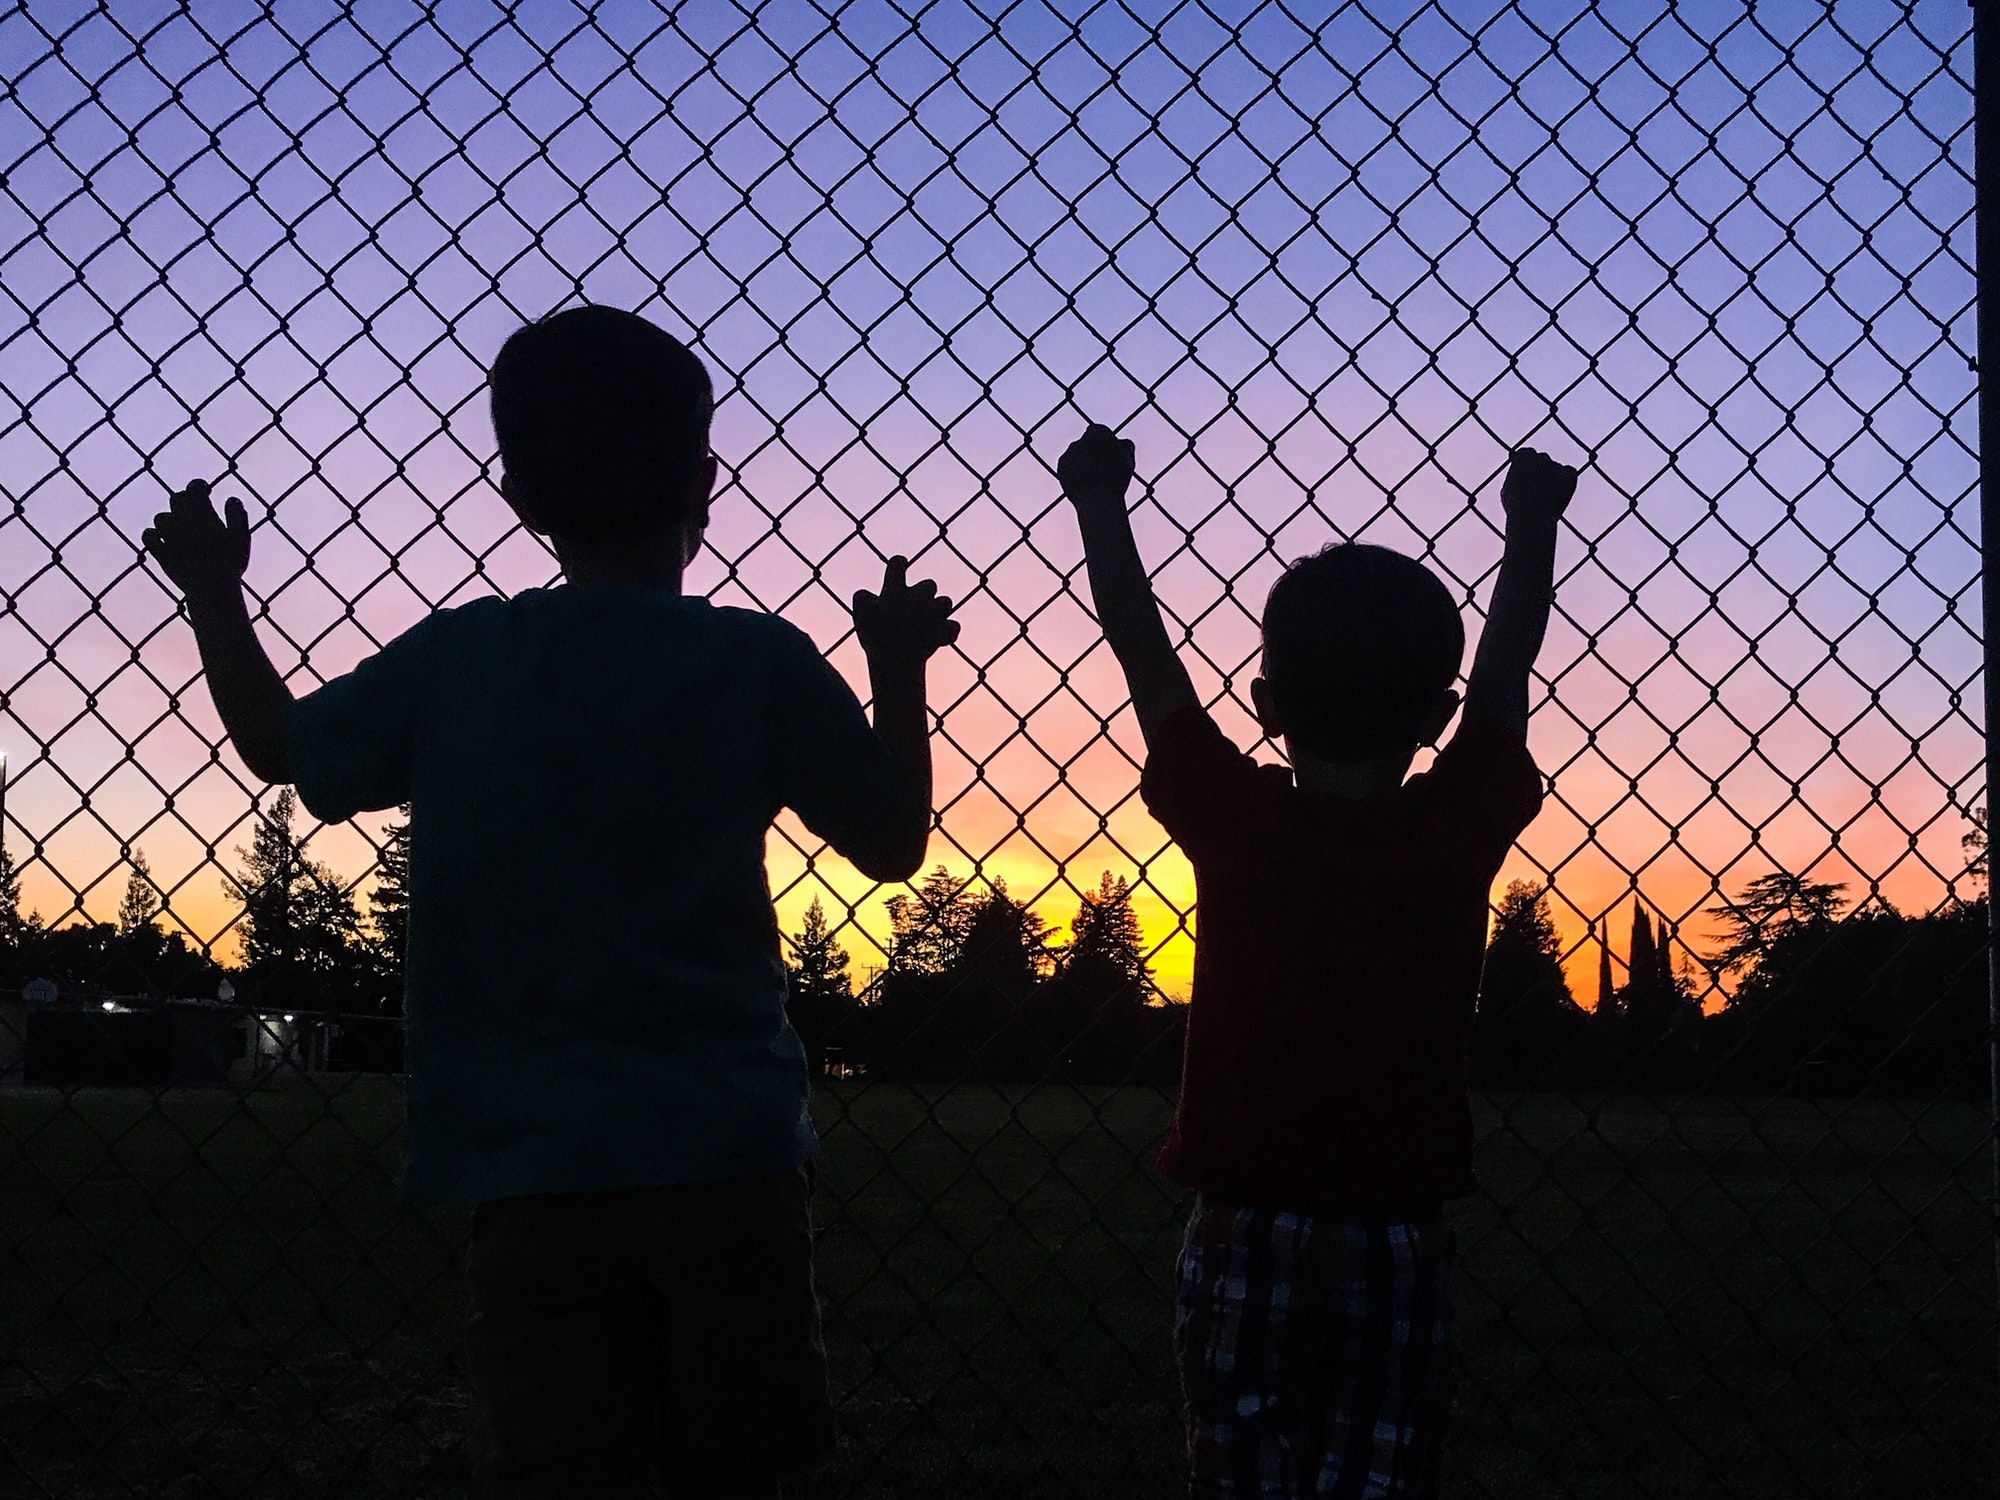 Brothers watching the sunset at the neighborhood park.